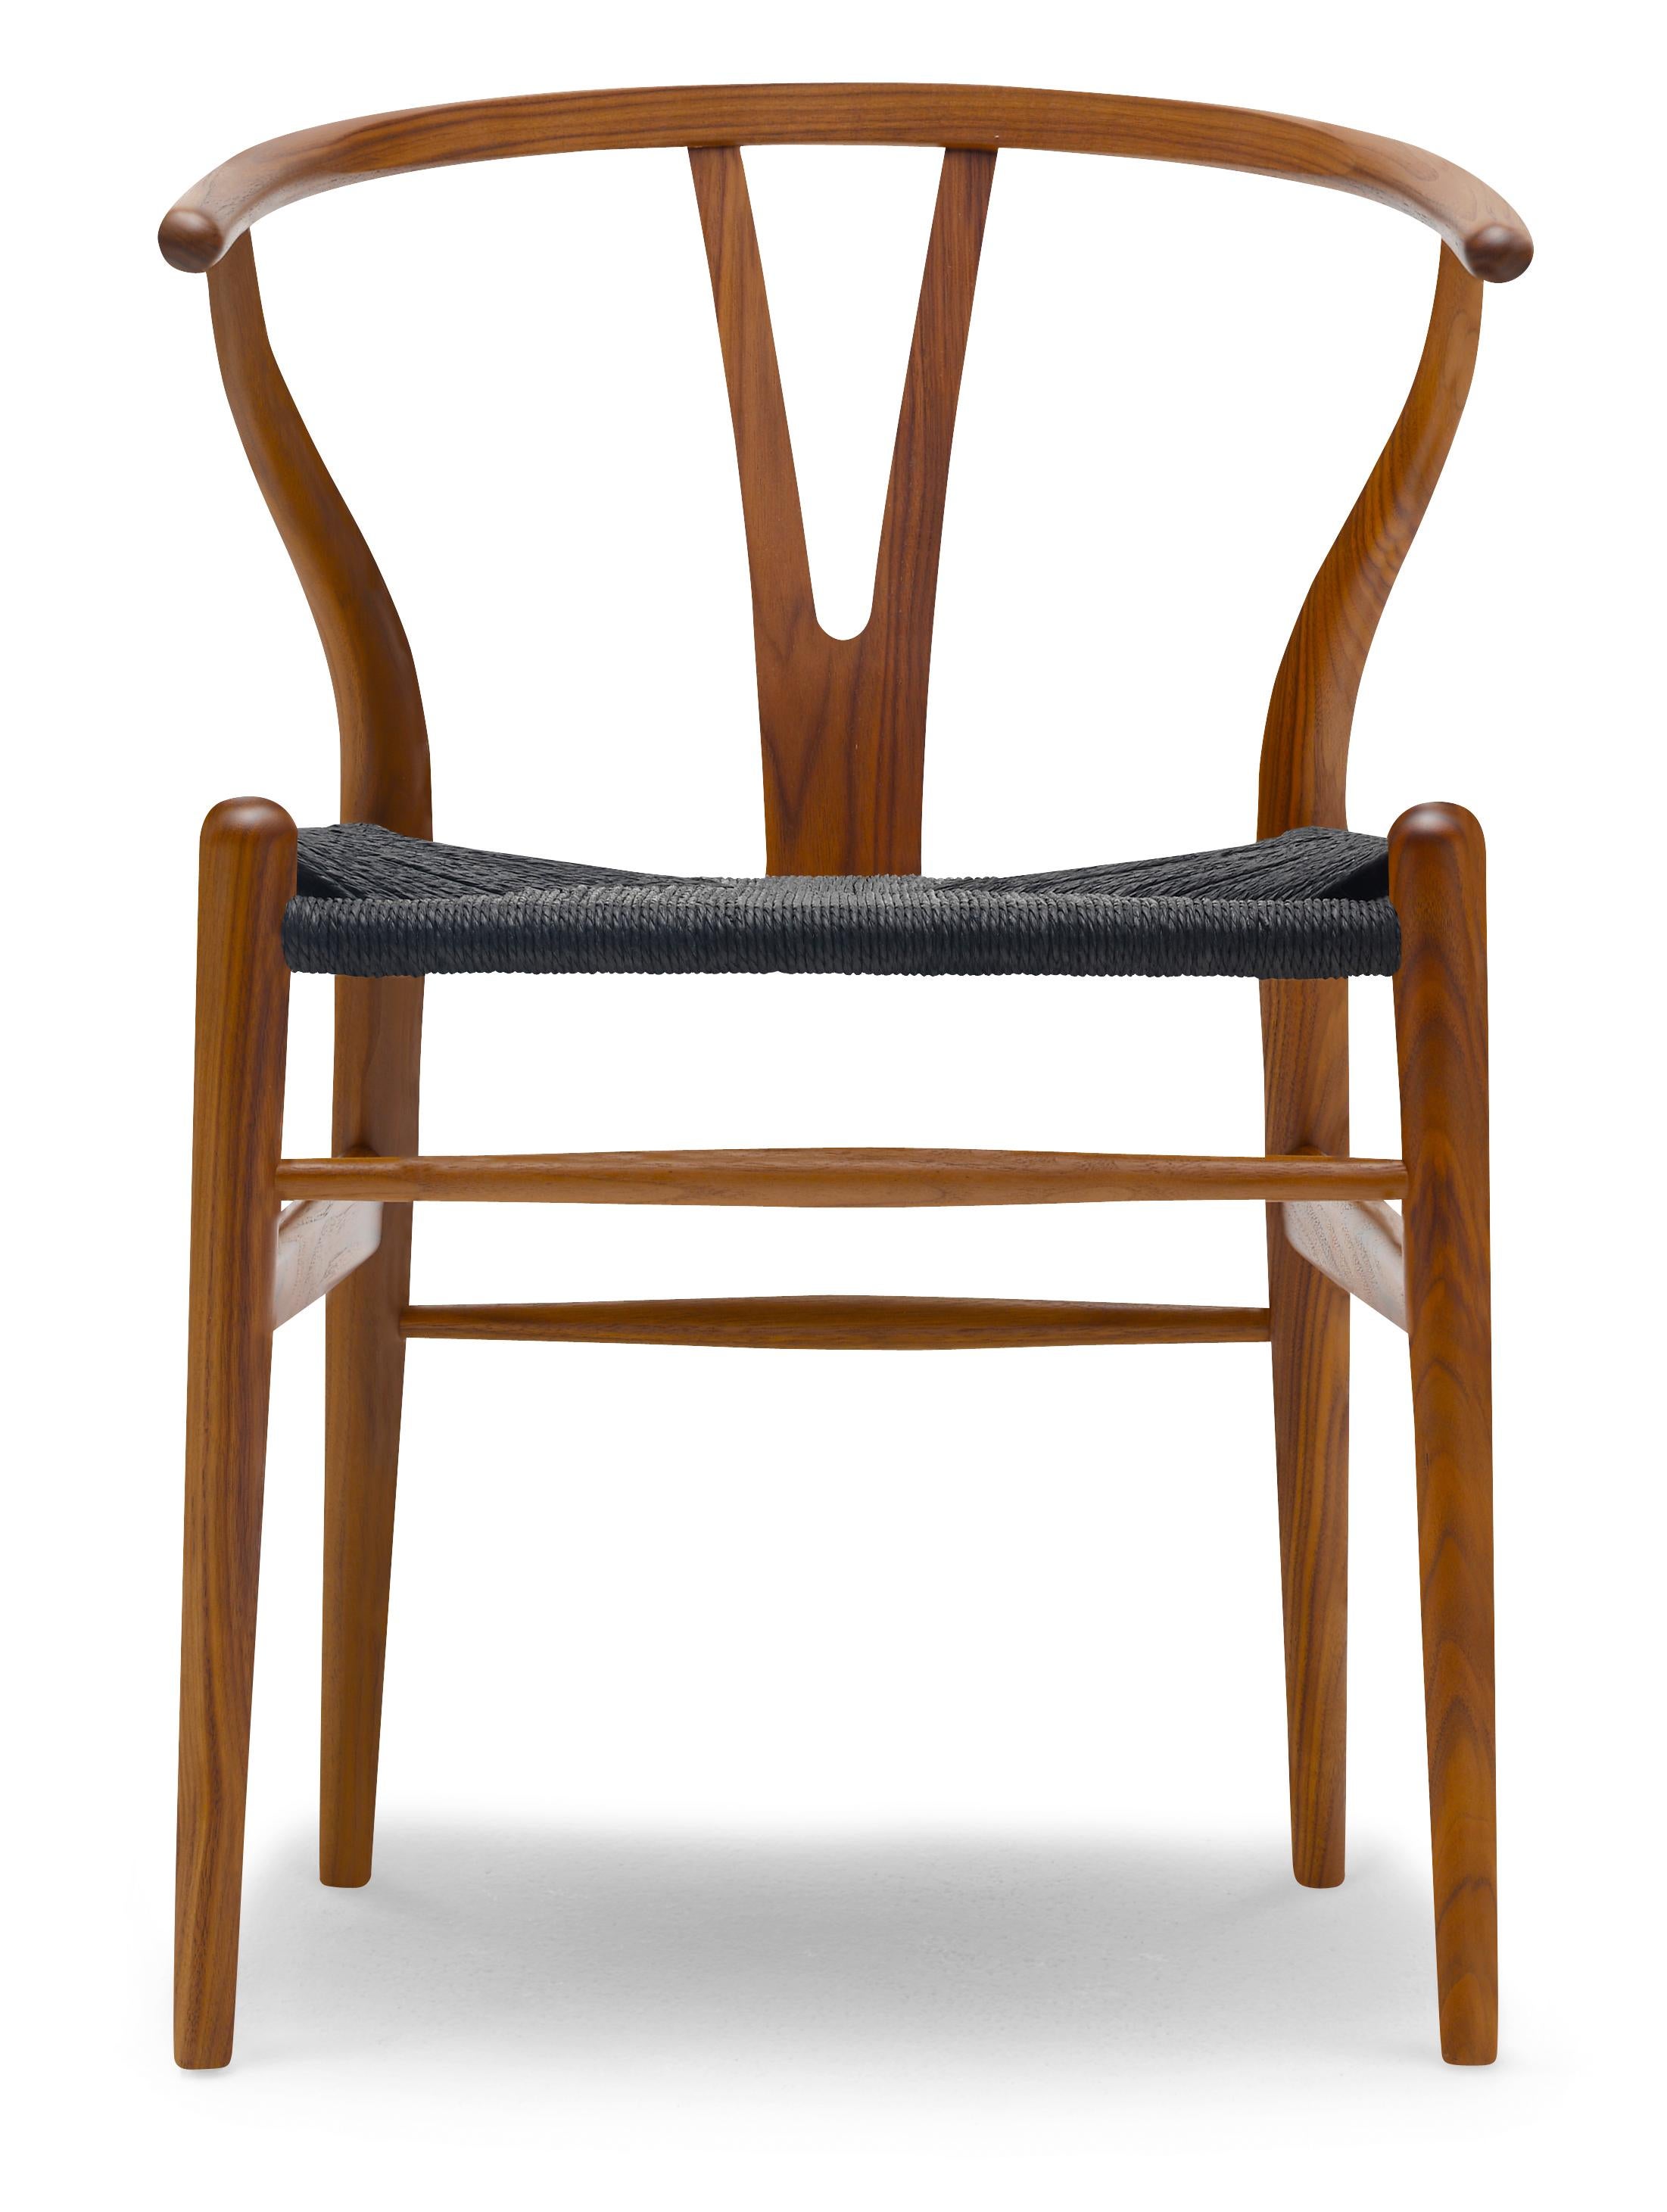 Brown (Walnut Lacquer) CH24 Wishbone Chair in Wood Finishes with Black Papercord Seat by Hans J. Wegner